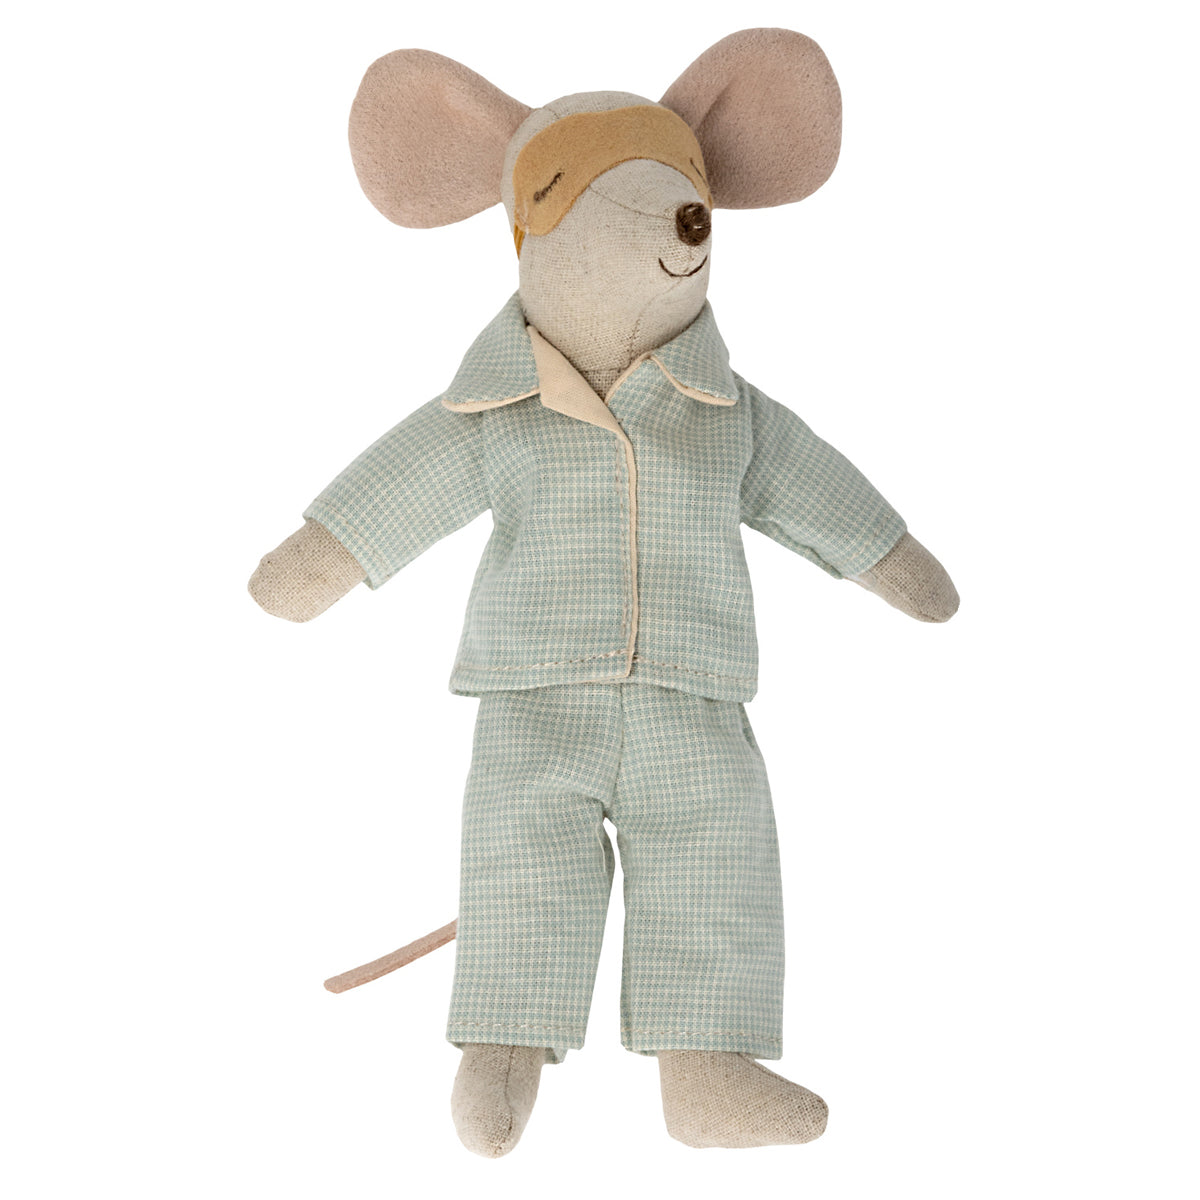 Pyjamas for dad mouse